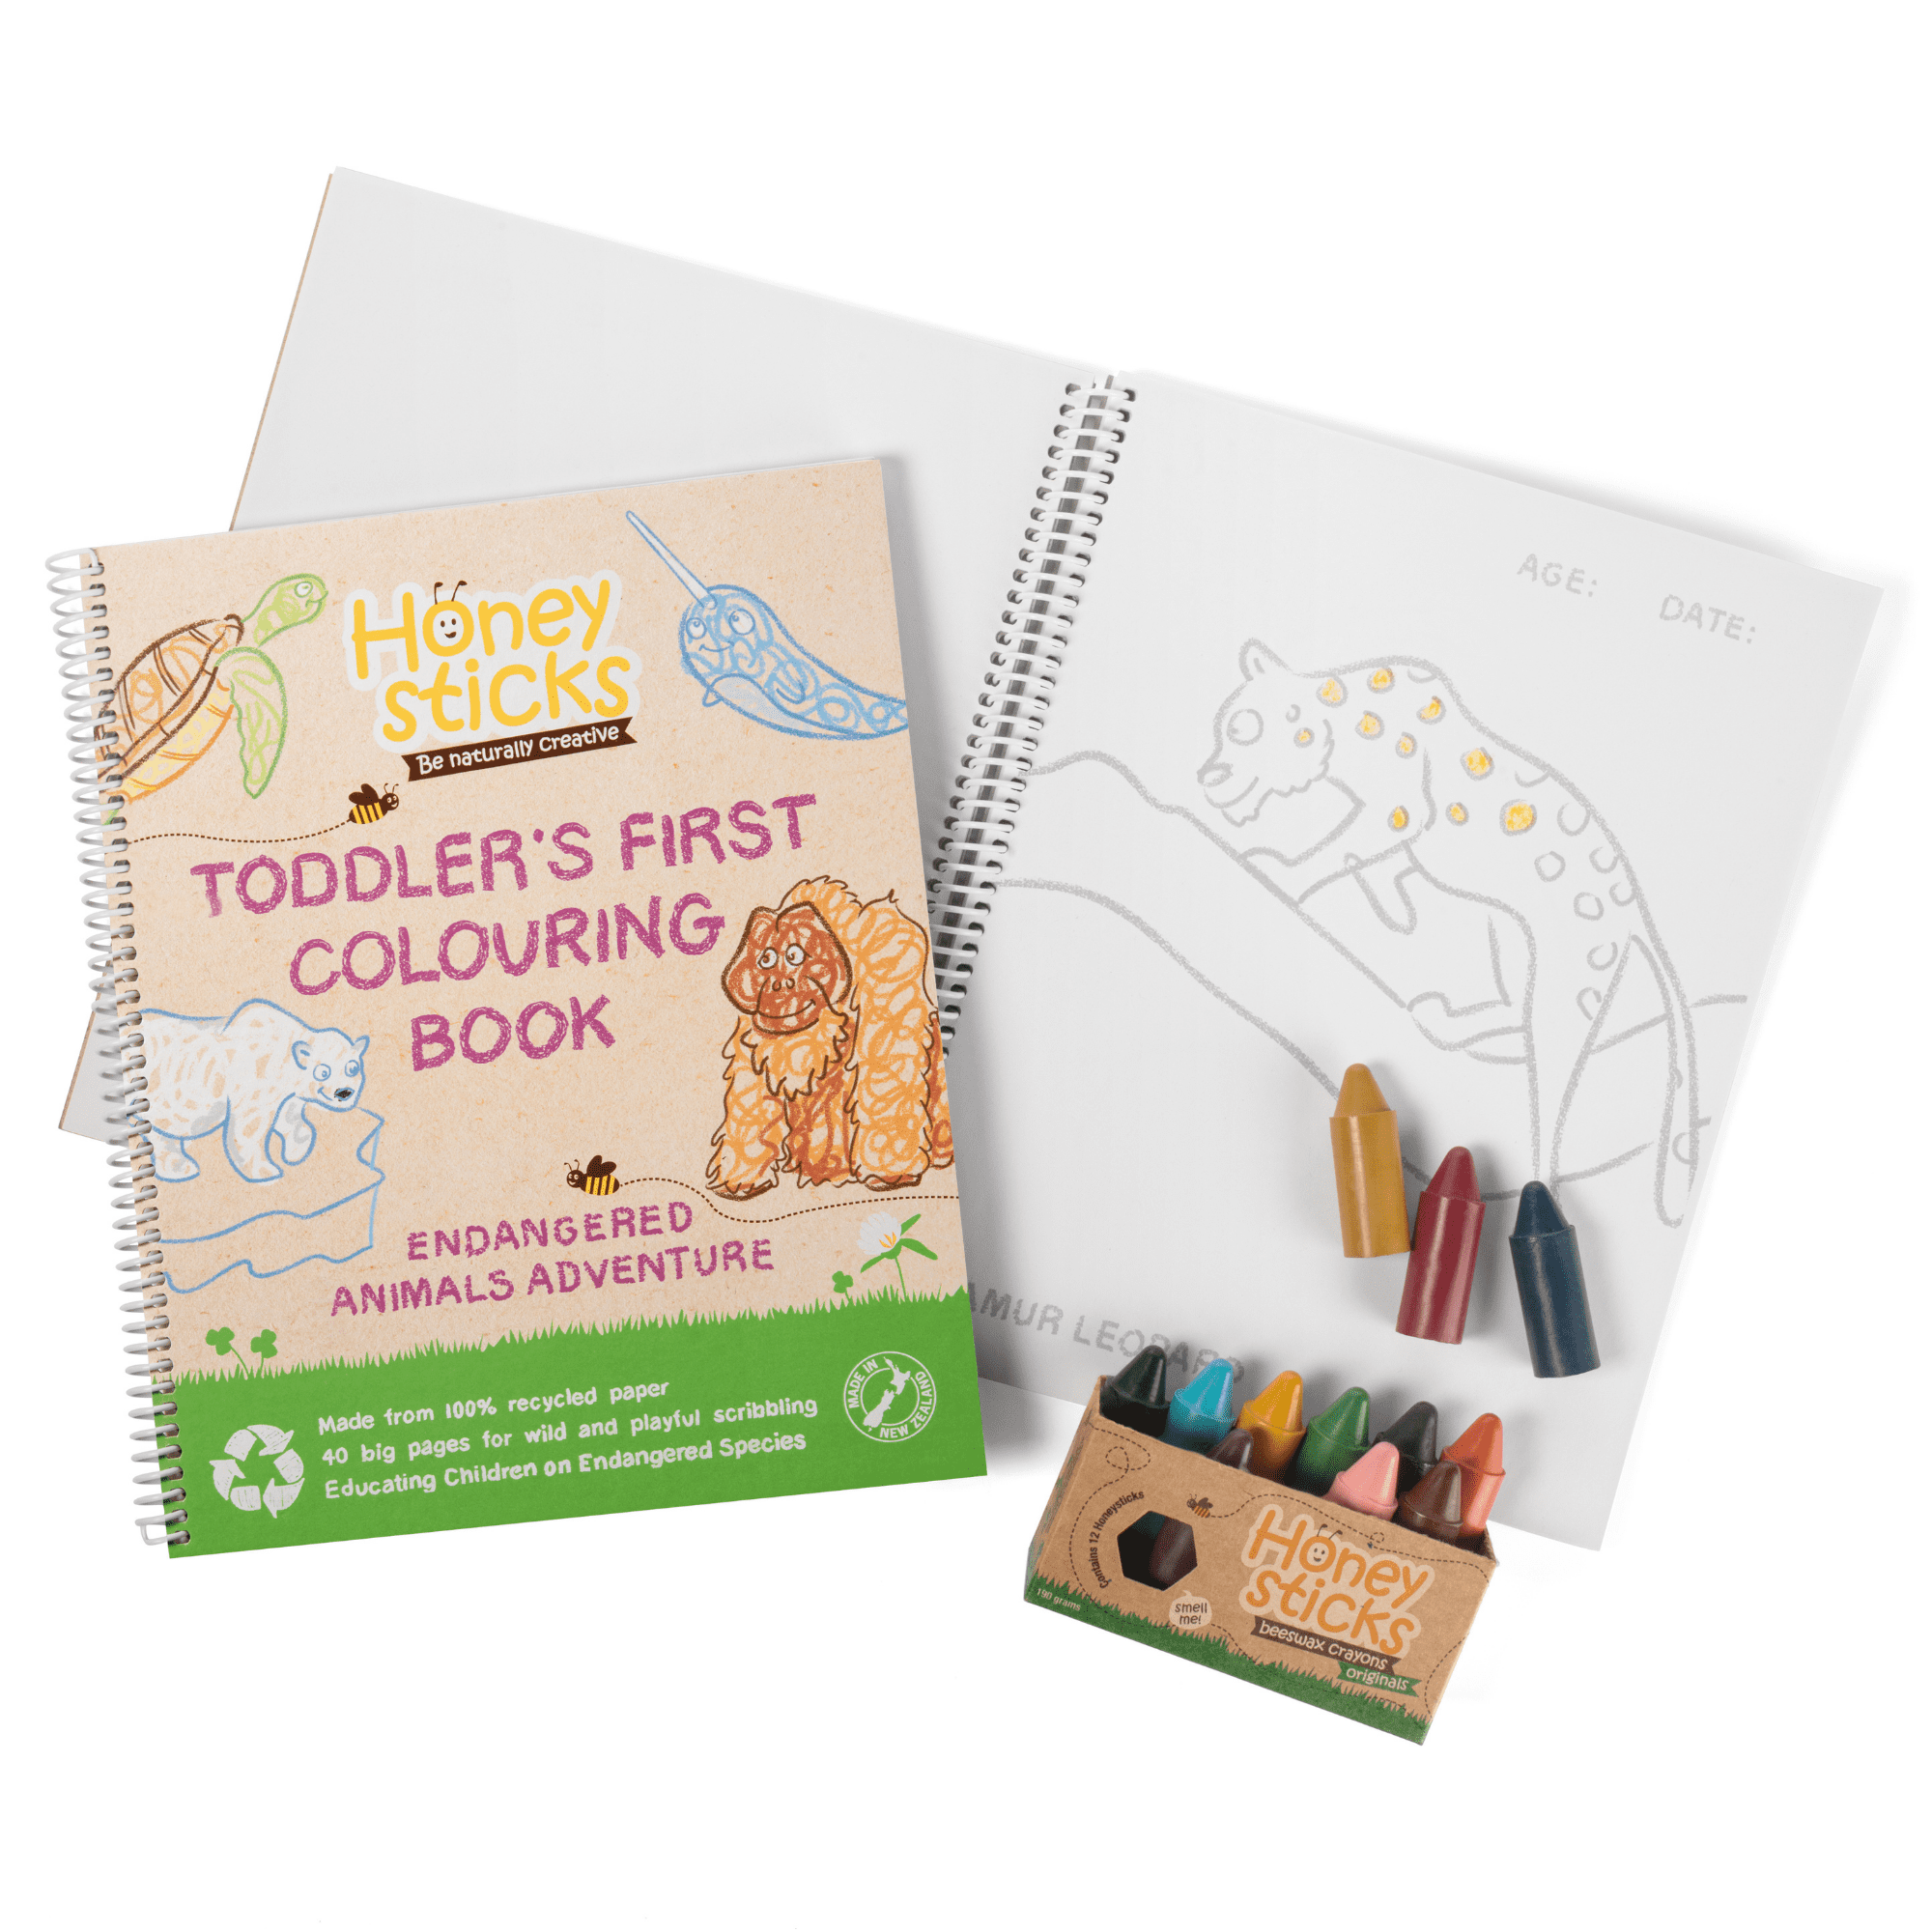 Honeysticks 100% Pure Beeswax Crayons (12 Pack) - Non Toxic Crayons  Handmade with Pure Beeswax and Food Grade Colours - Child/Toddler Safe,  Easy to Hold and Use - Sustainably Made in New